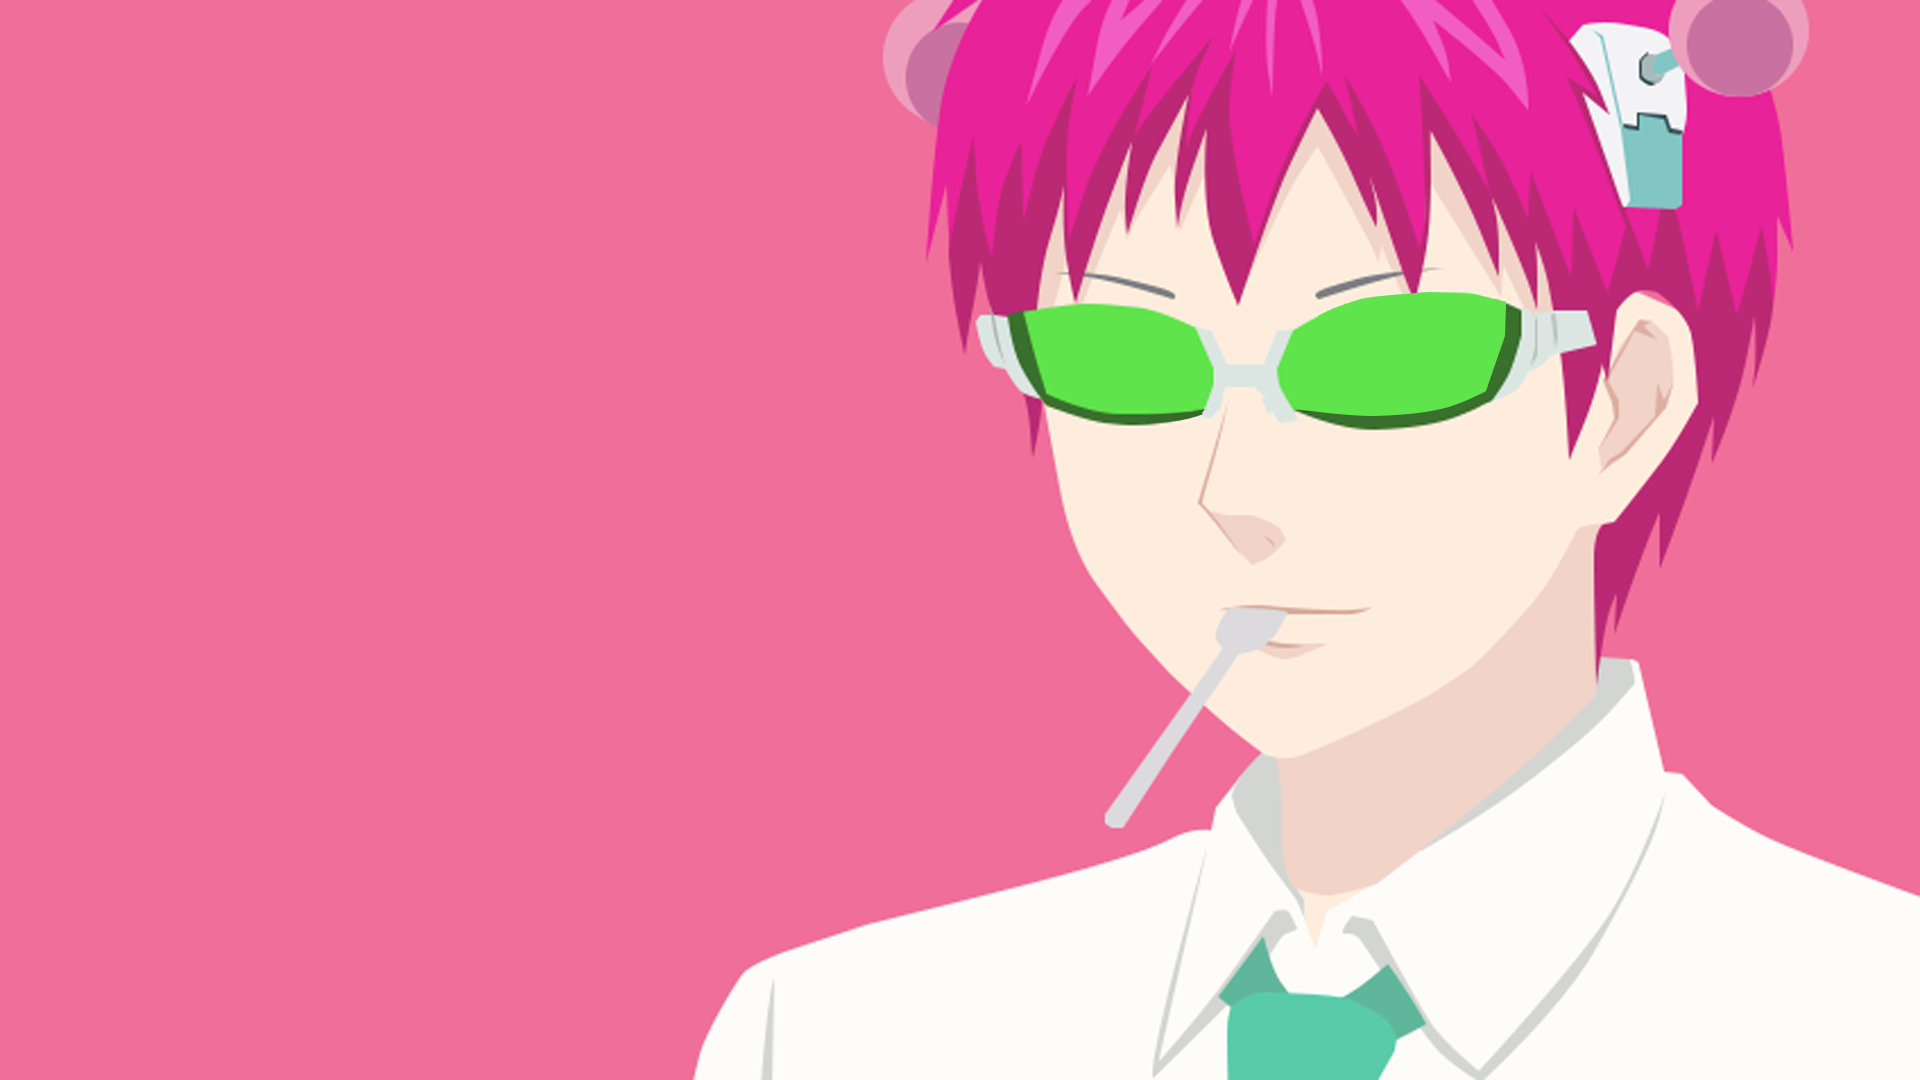 The Disastrous Life of Saiki K. Picture by YaMaKEN